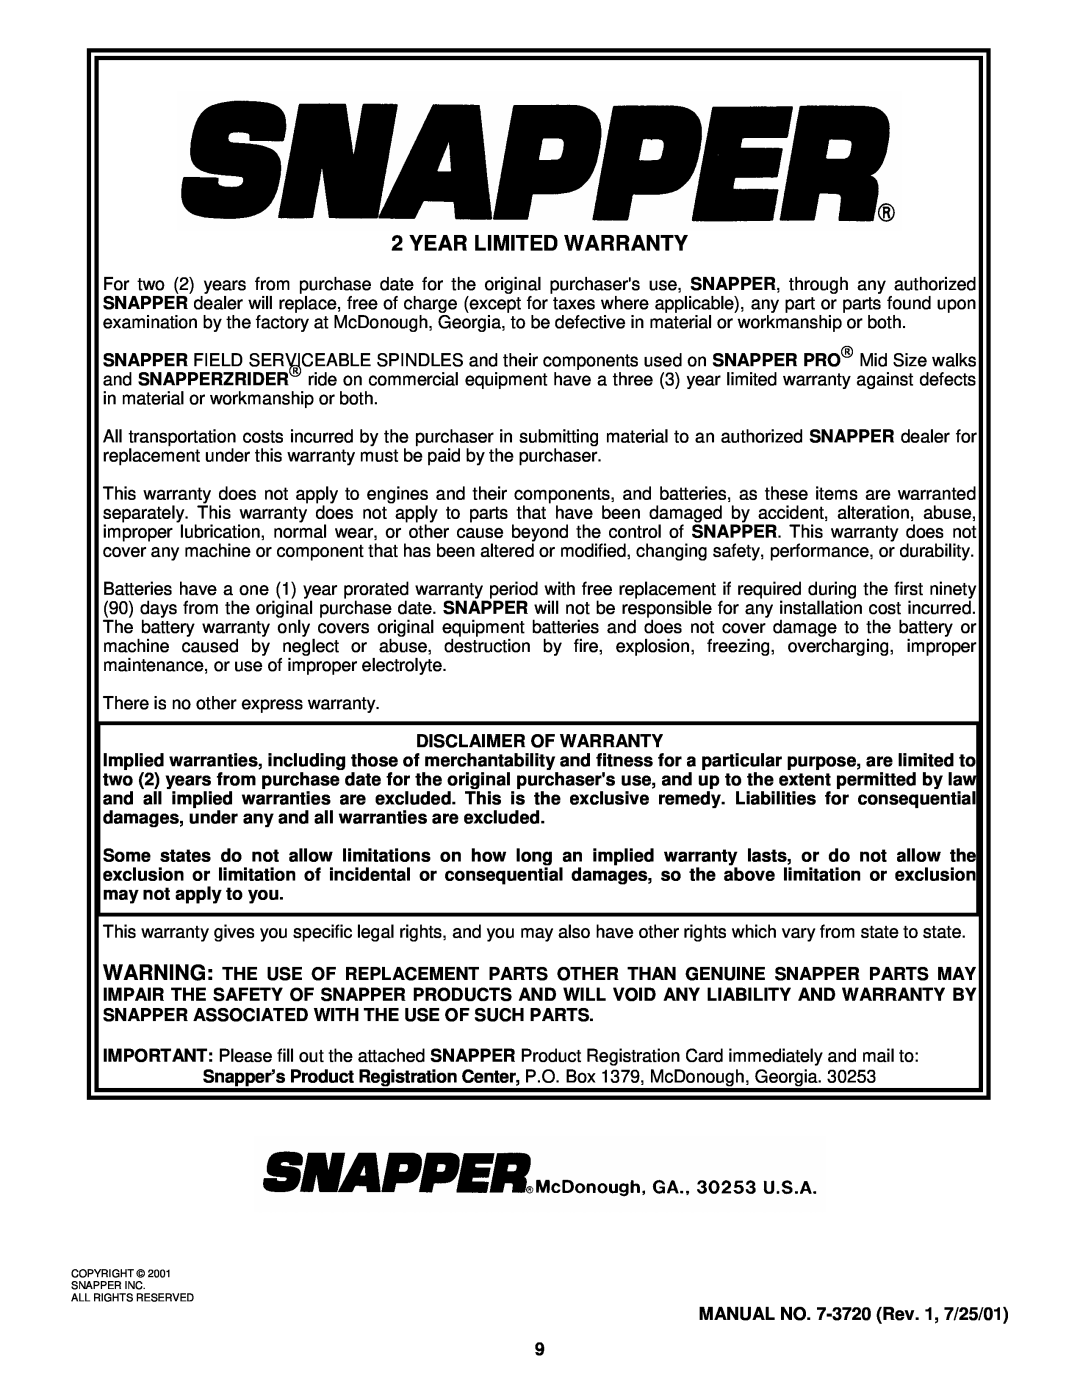 Snapper Out Front Z-rider Mower manual Year Limited Warranty 